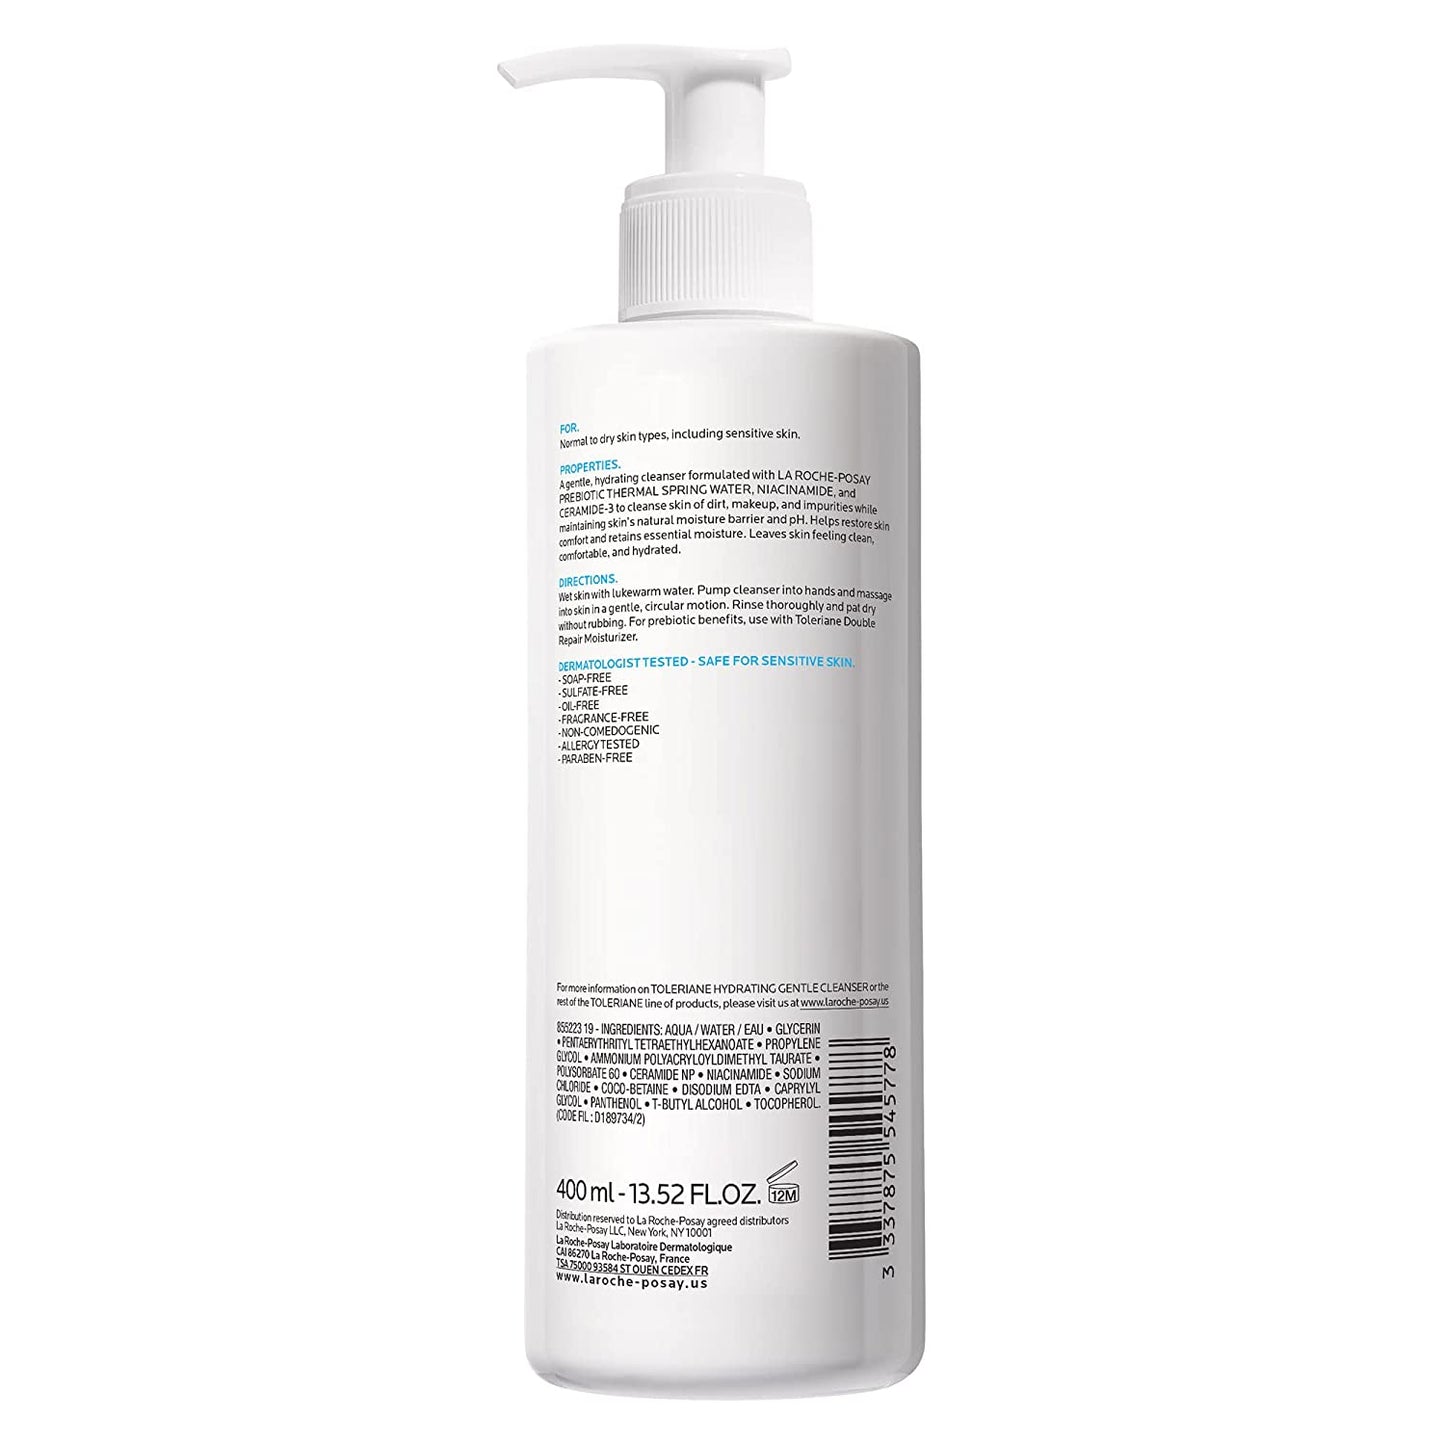 La Roche-Posay Toleriane Hydrating Gentle Face Cleanser - Daily Facial Cleanser with Niacinamide and Ceramides - For Sensitive Skin - Moisturizing Face Wash for Normal to Dry Skin - Fragrance Free